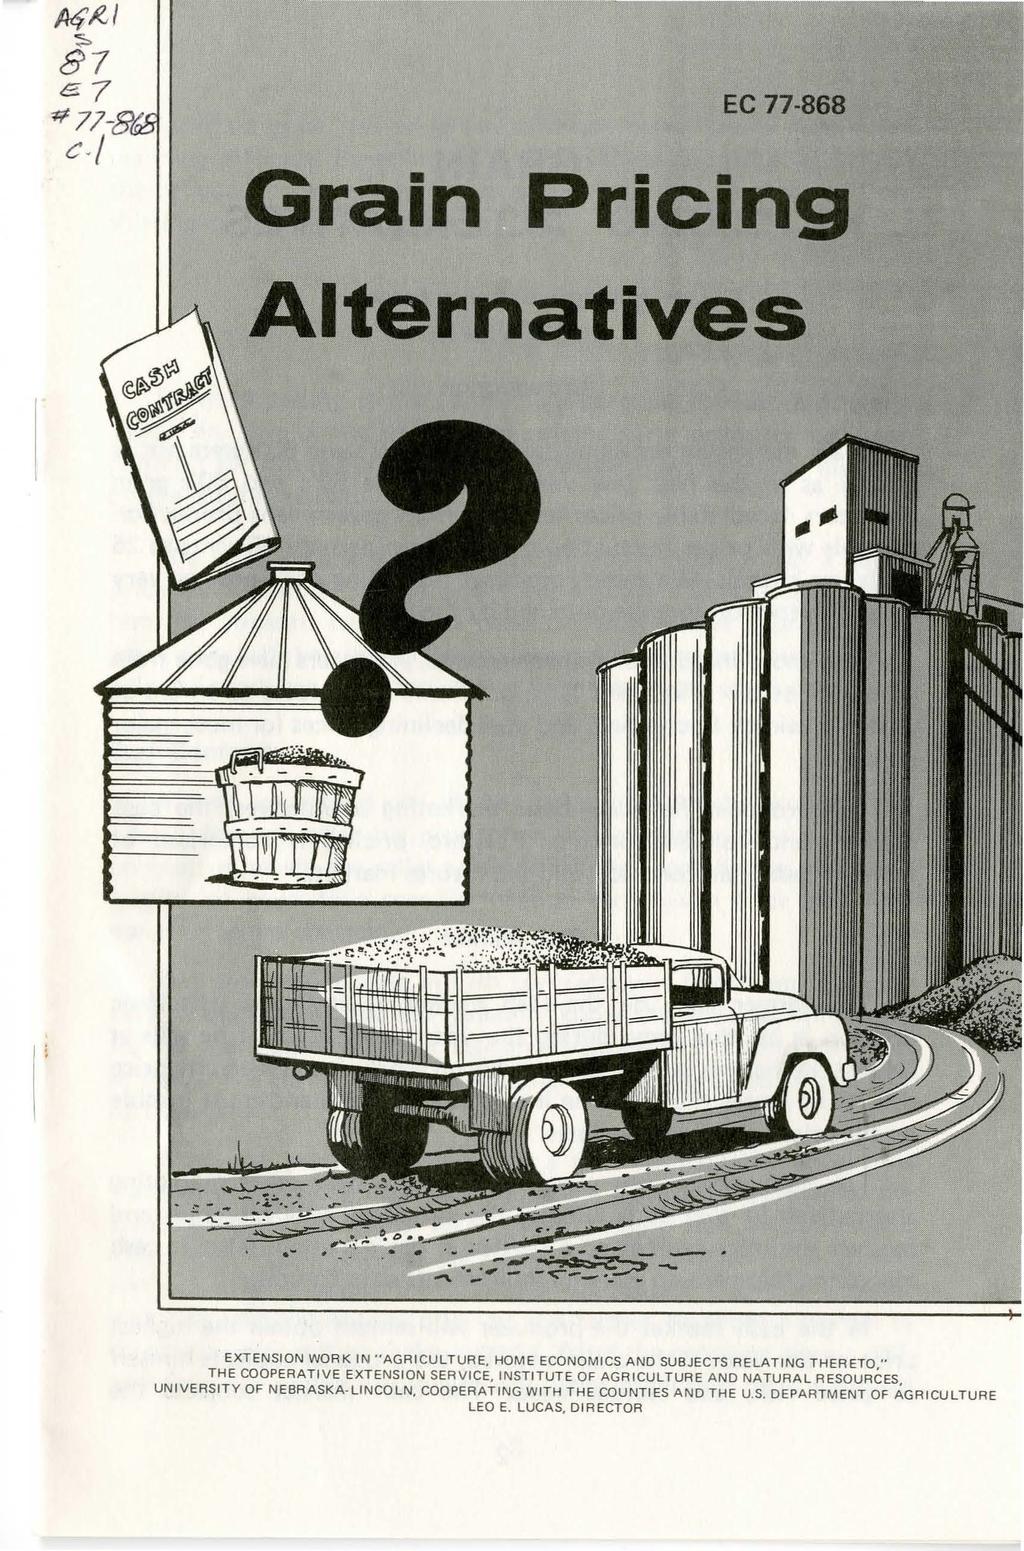 EC 77-868 Grain Pricing Alternatives EXTENSION WORK IN "AGRICULTURE, HOME ECONOMICS AND SUBJECTS RELATING THERETO," THE COOPERATIVE EXTENSION SER V ICE, INSTITUTE